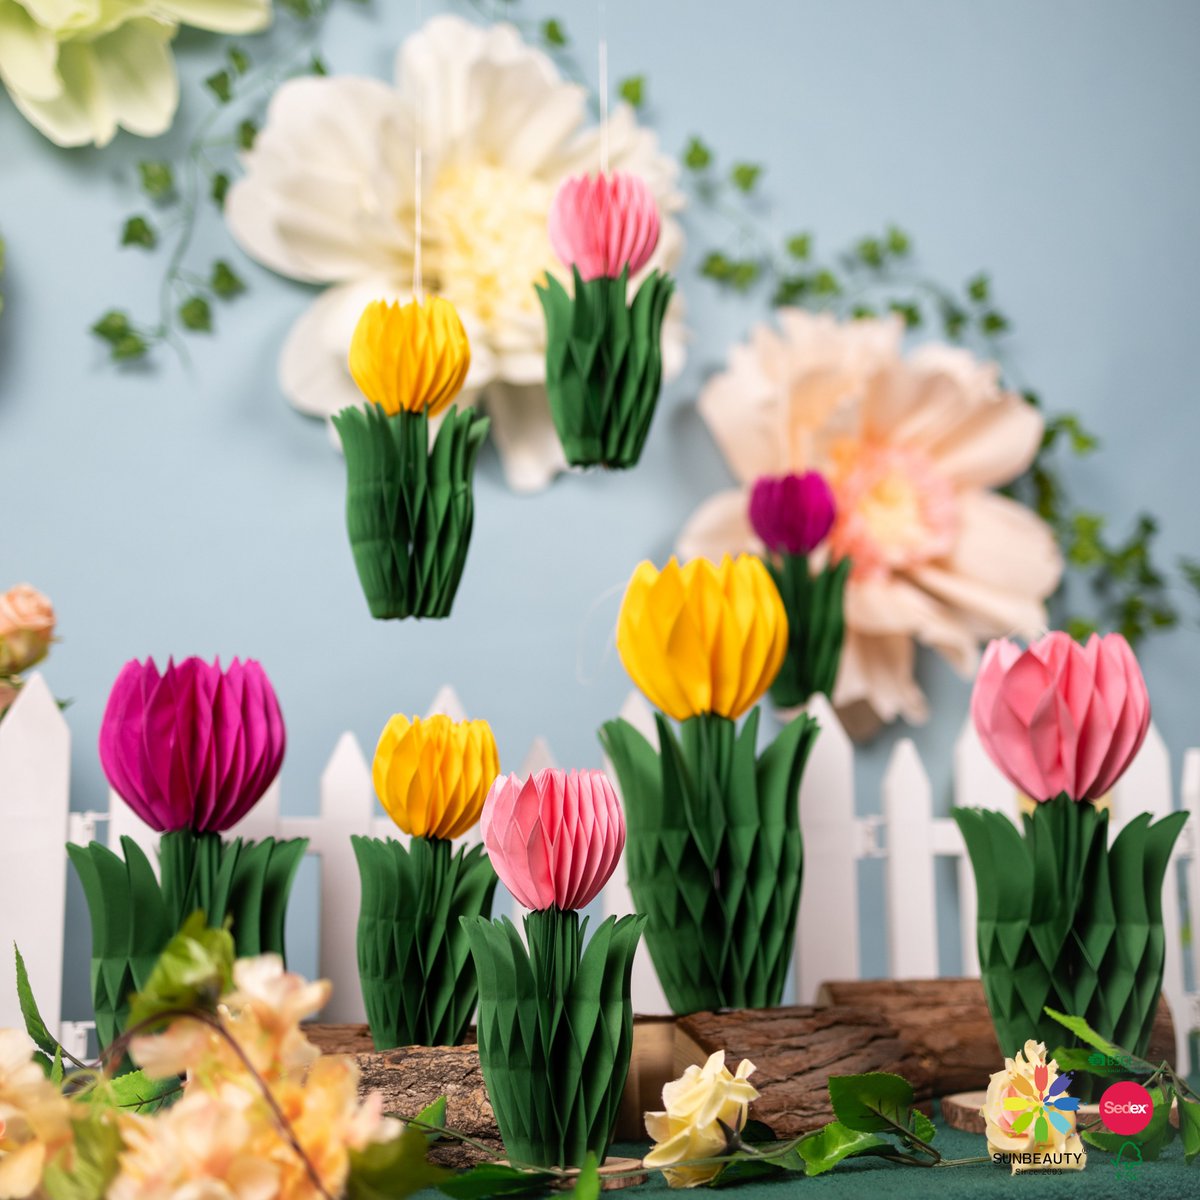 Bring the beauty of spring indoors with our enchanting tulip paper honeycomb decorations! sunbeauty.com/products/party…